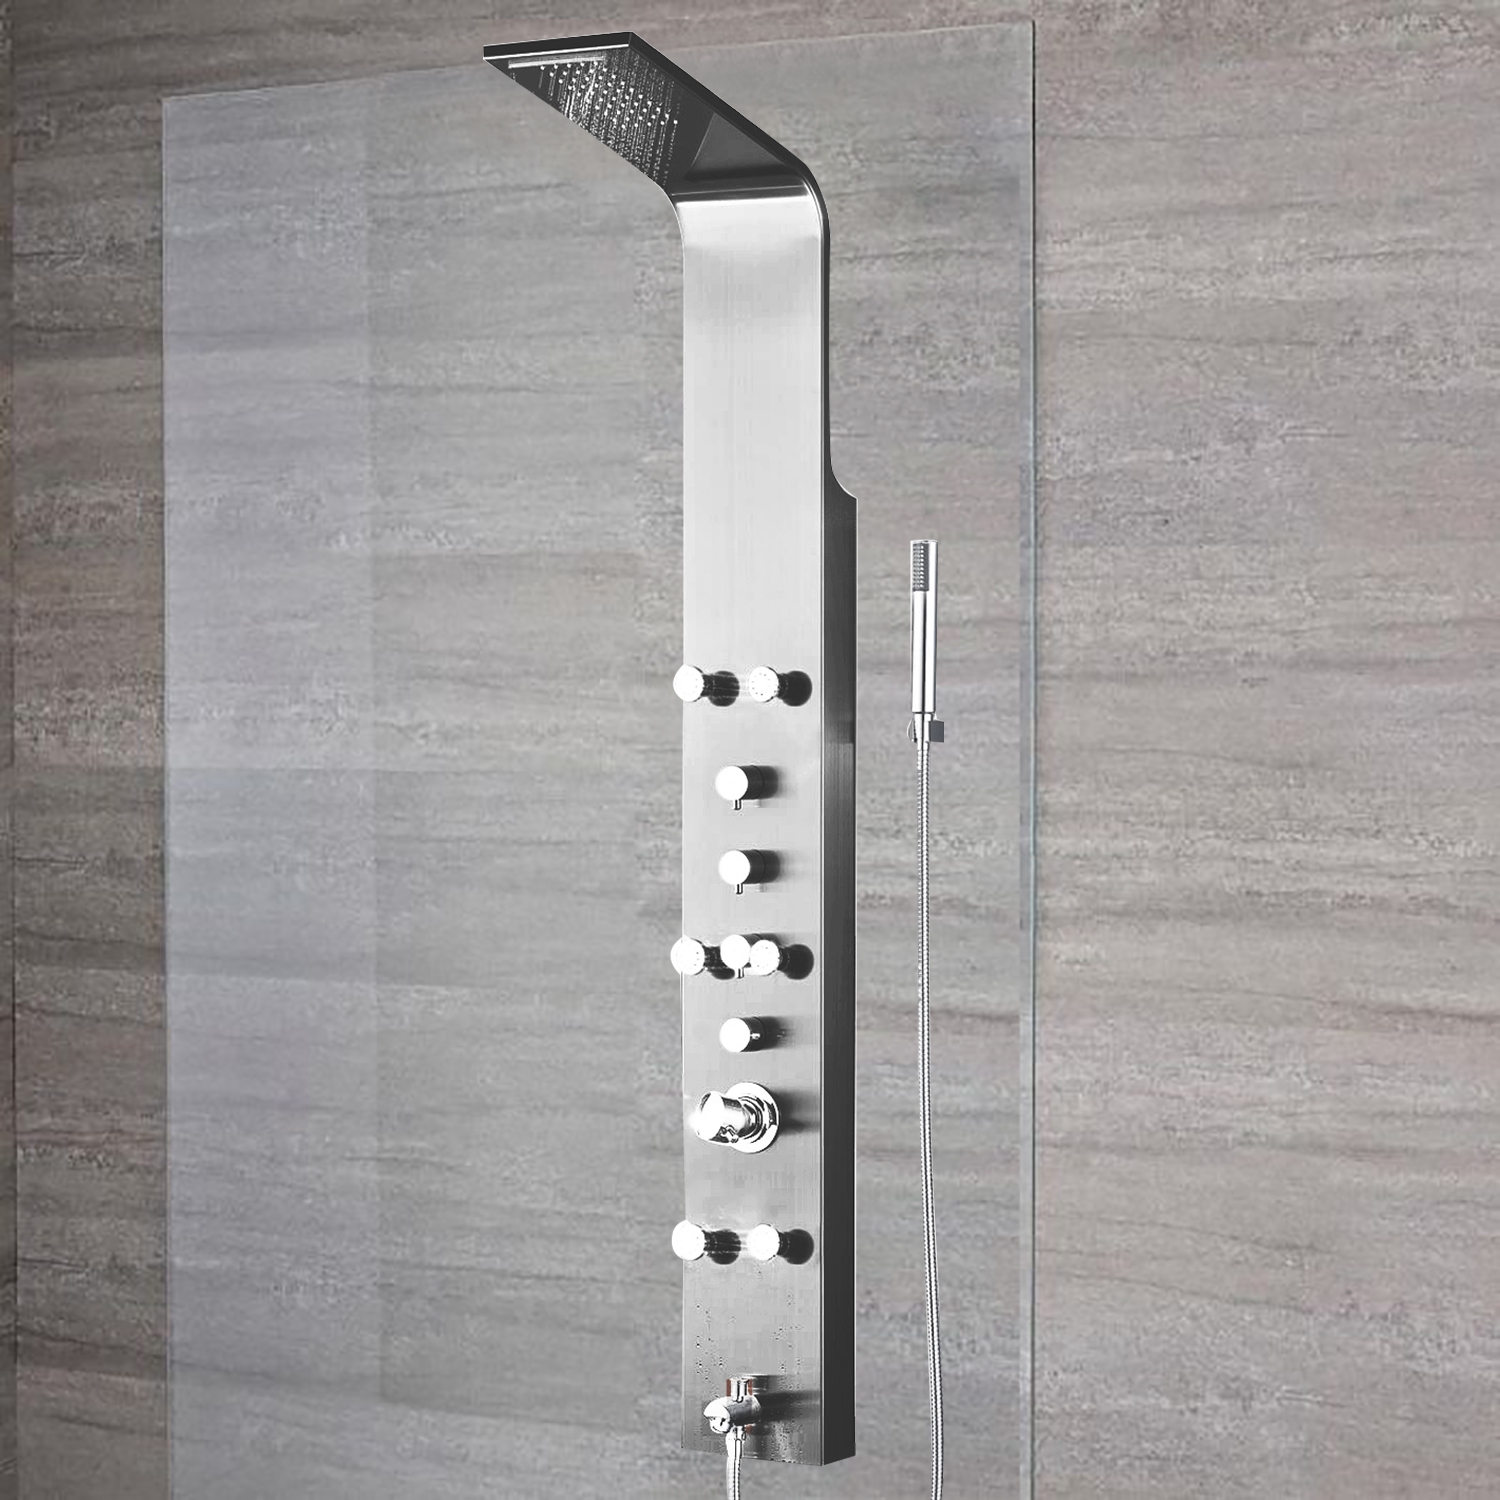 Details about   63" Thermostatic Stainless Steel Bath Shower Hot Water Panel Body Massager Jets 